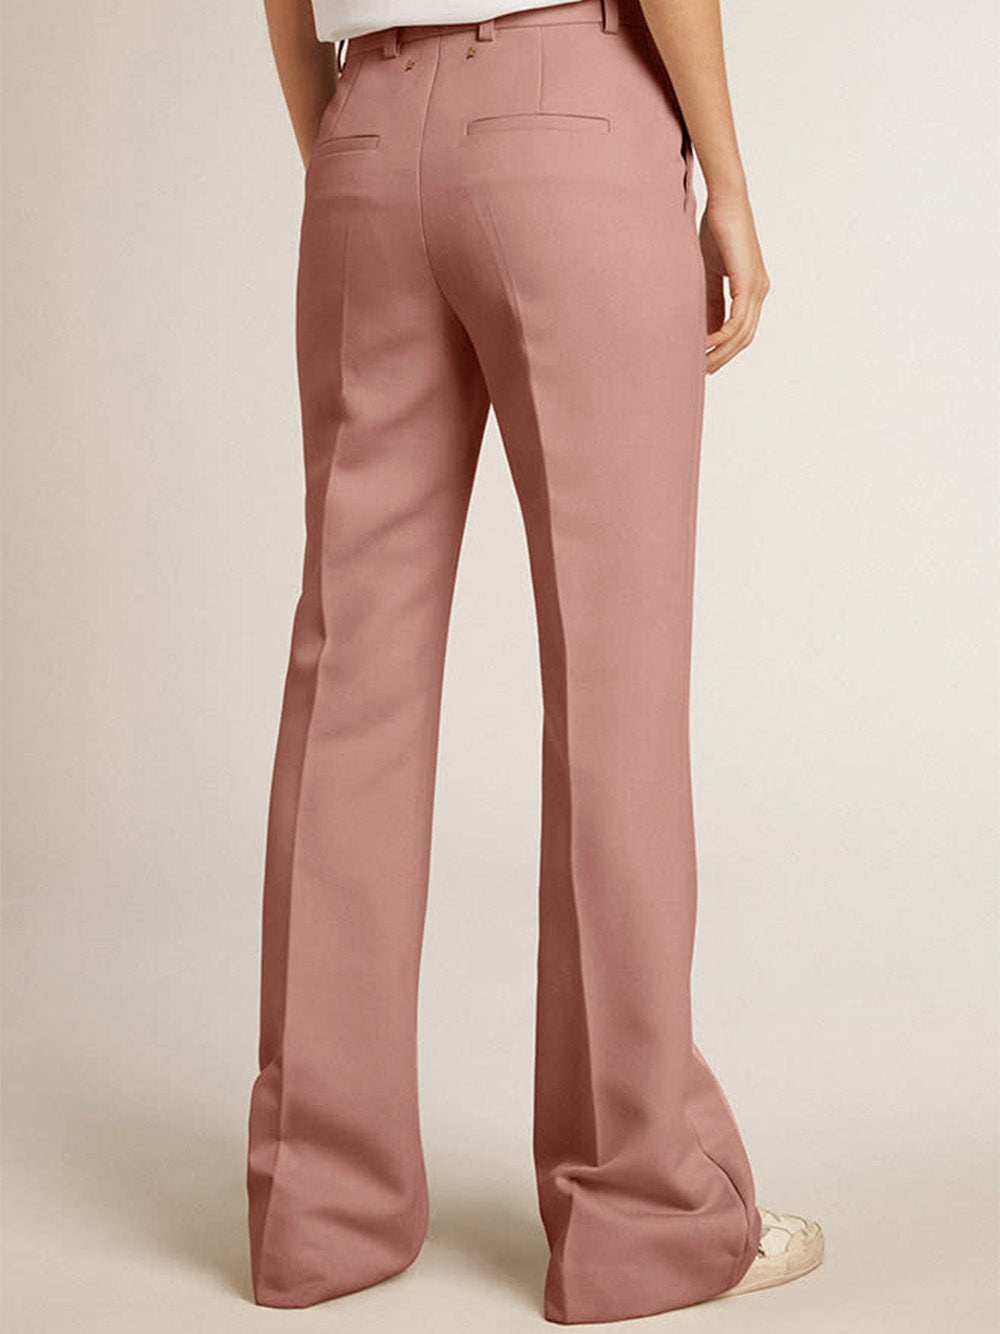 Pants in pink tailoring fabric